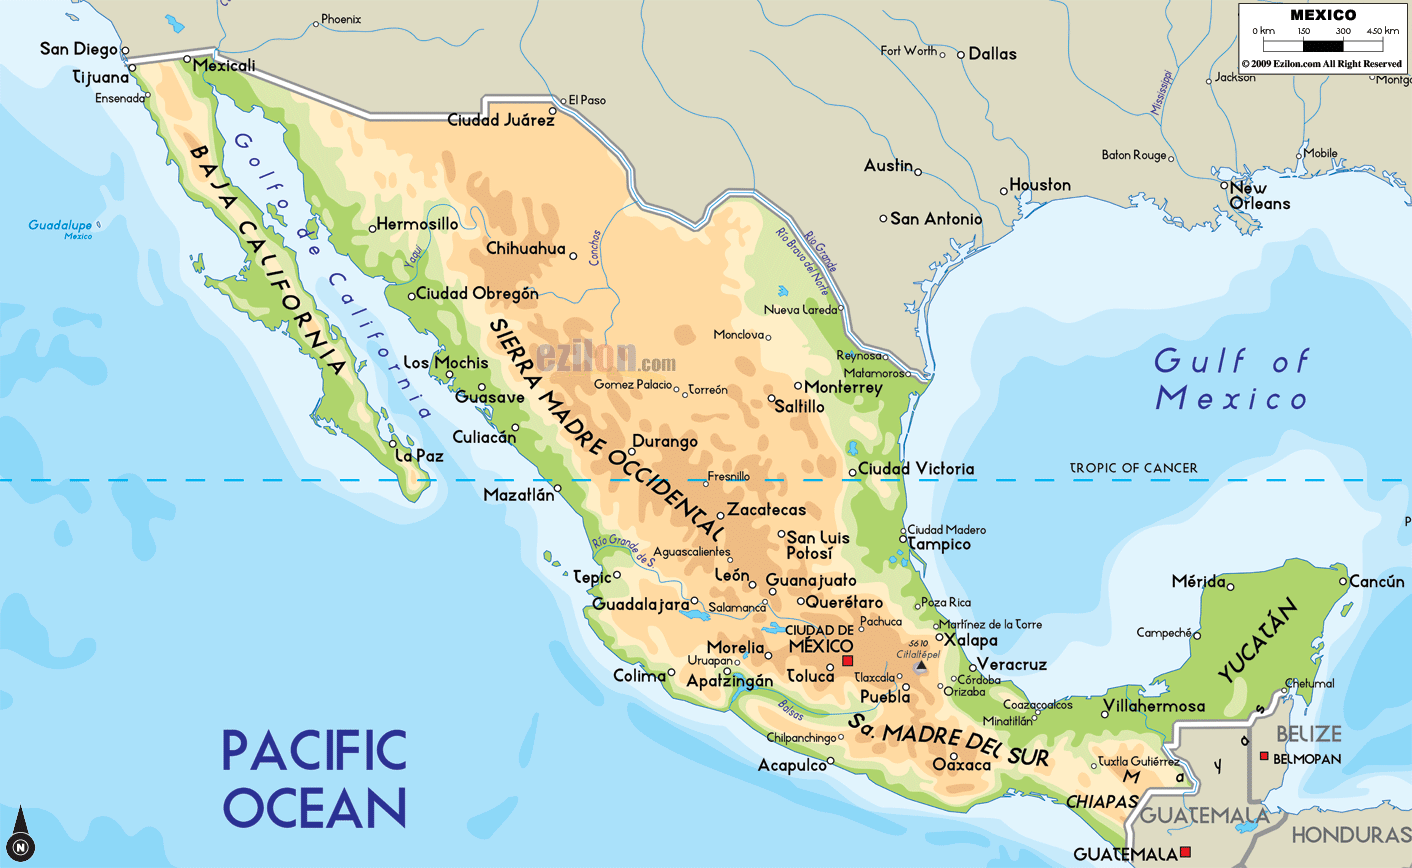 The Physical Map of Mexico showing major geographical features like elevations, mountain ranges, ocean, lakes, plateaus, peninsulas, rivers, plains, landforms and other topographic features.